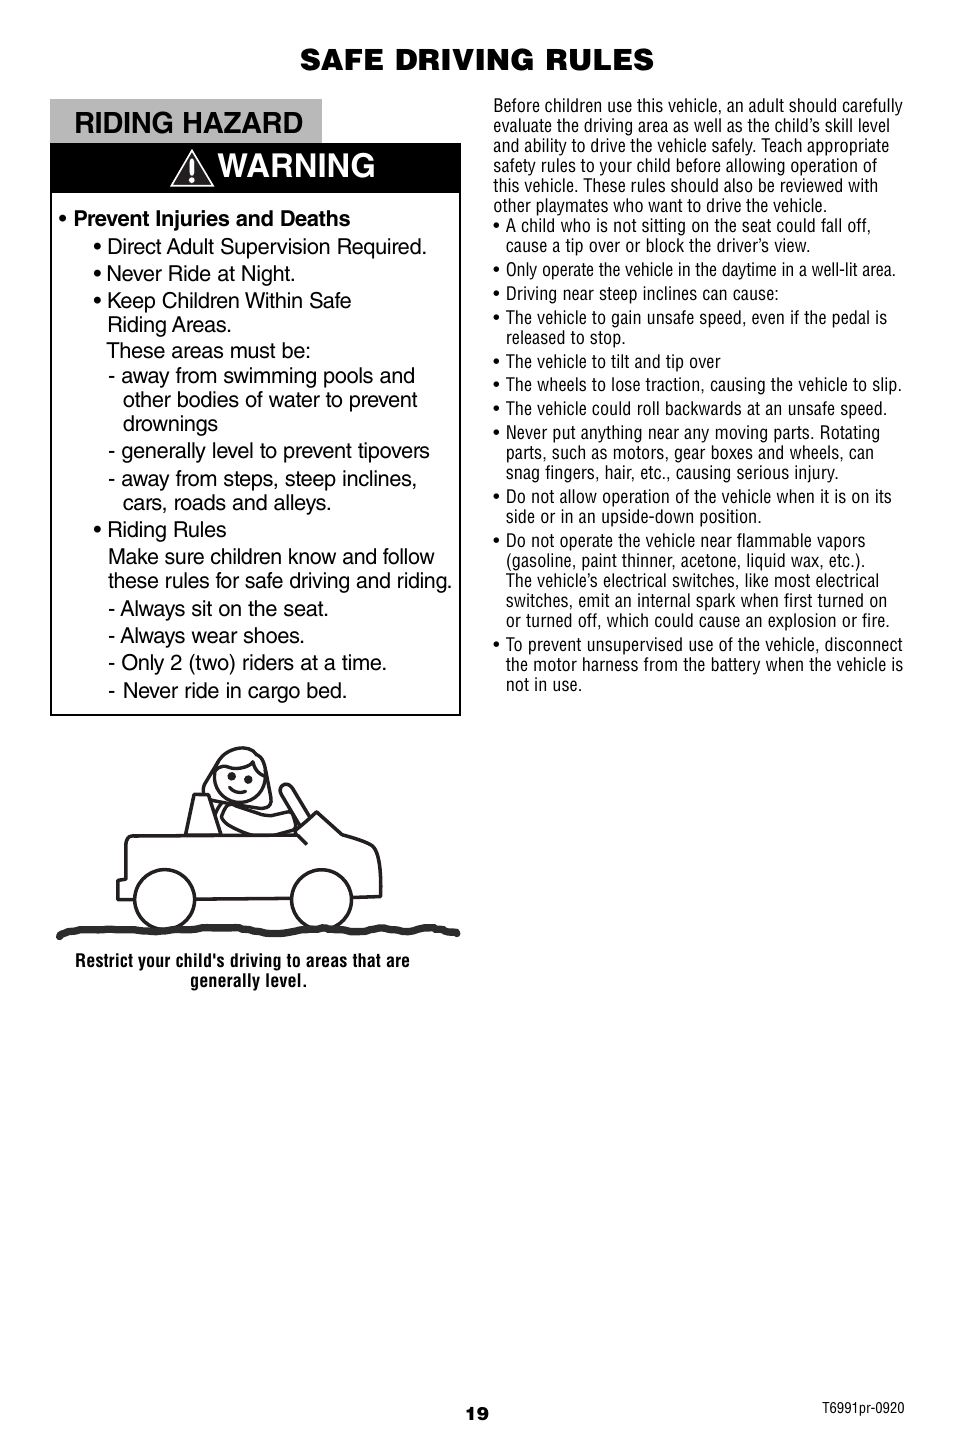 Warning, Riding hazard, Safe driving rules | Fisher-Price Power Wheels Ford F-150 T6991 User Manual | Page 19 / 28